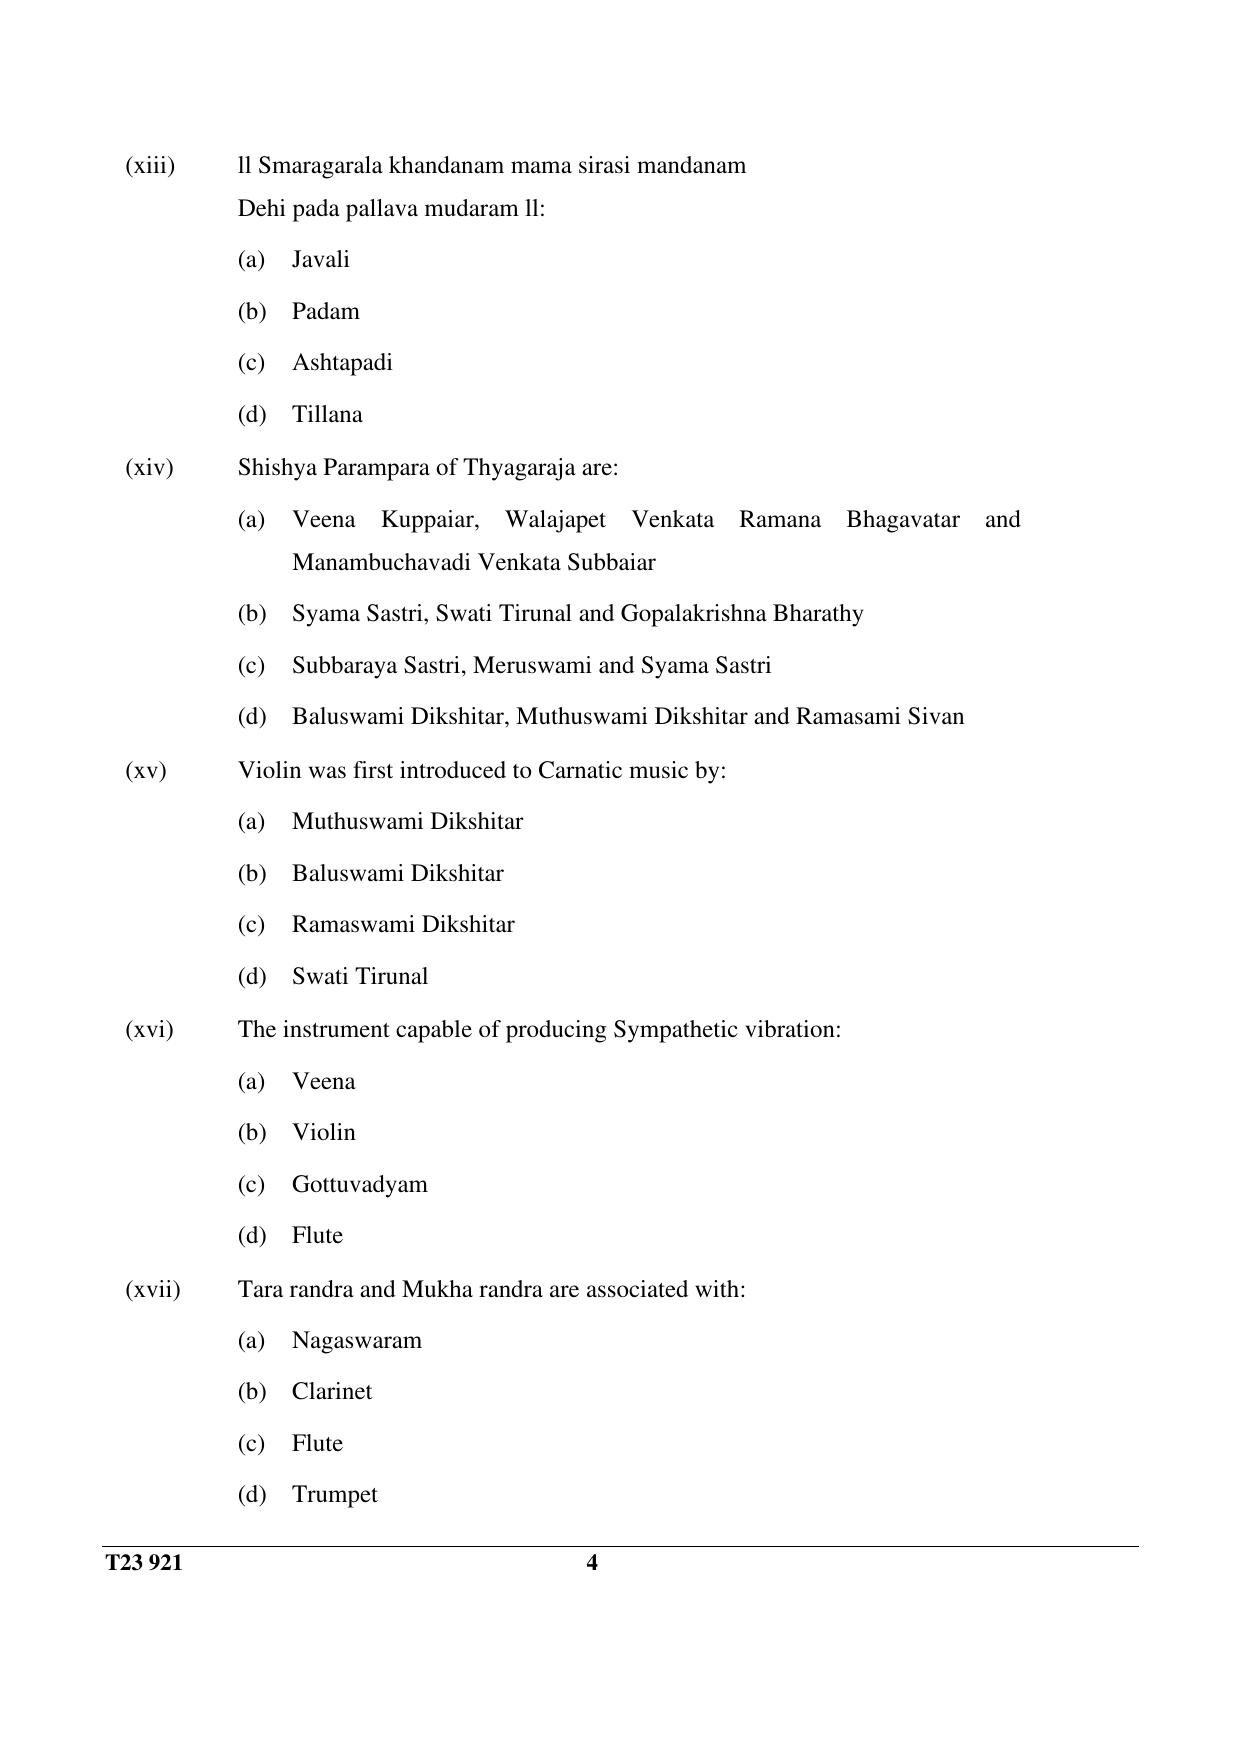 ICSE Class 10 CARNATIC MUSIC 2023 Question Paper - Page 4